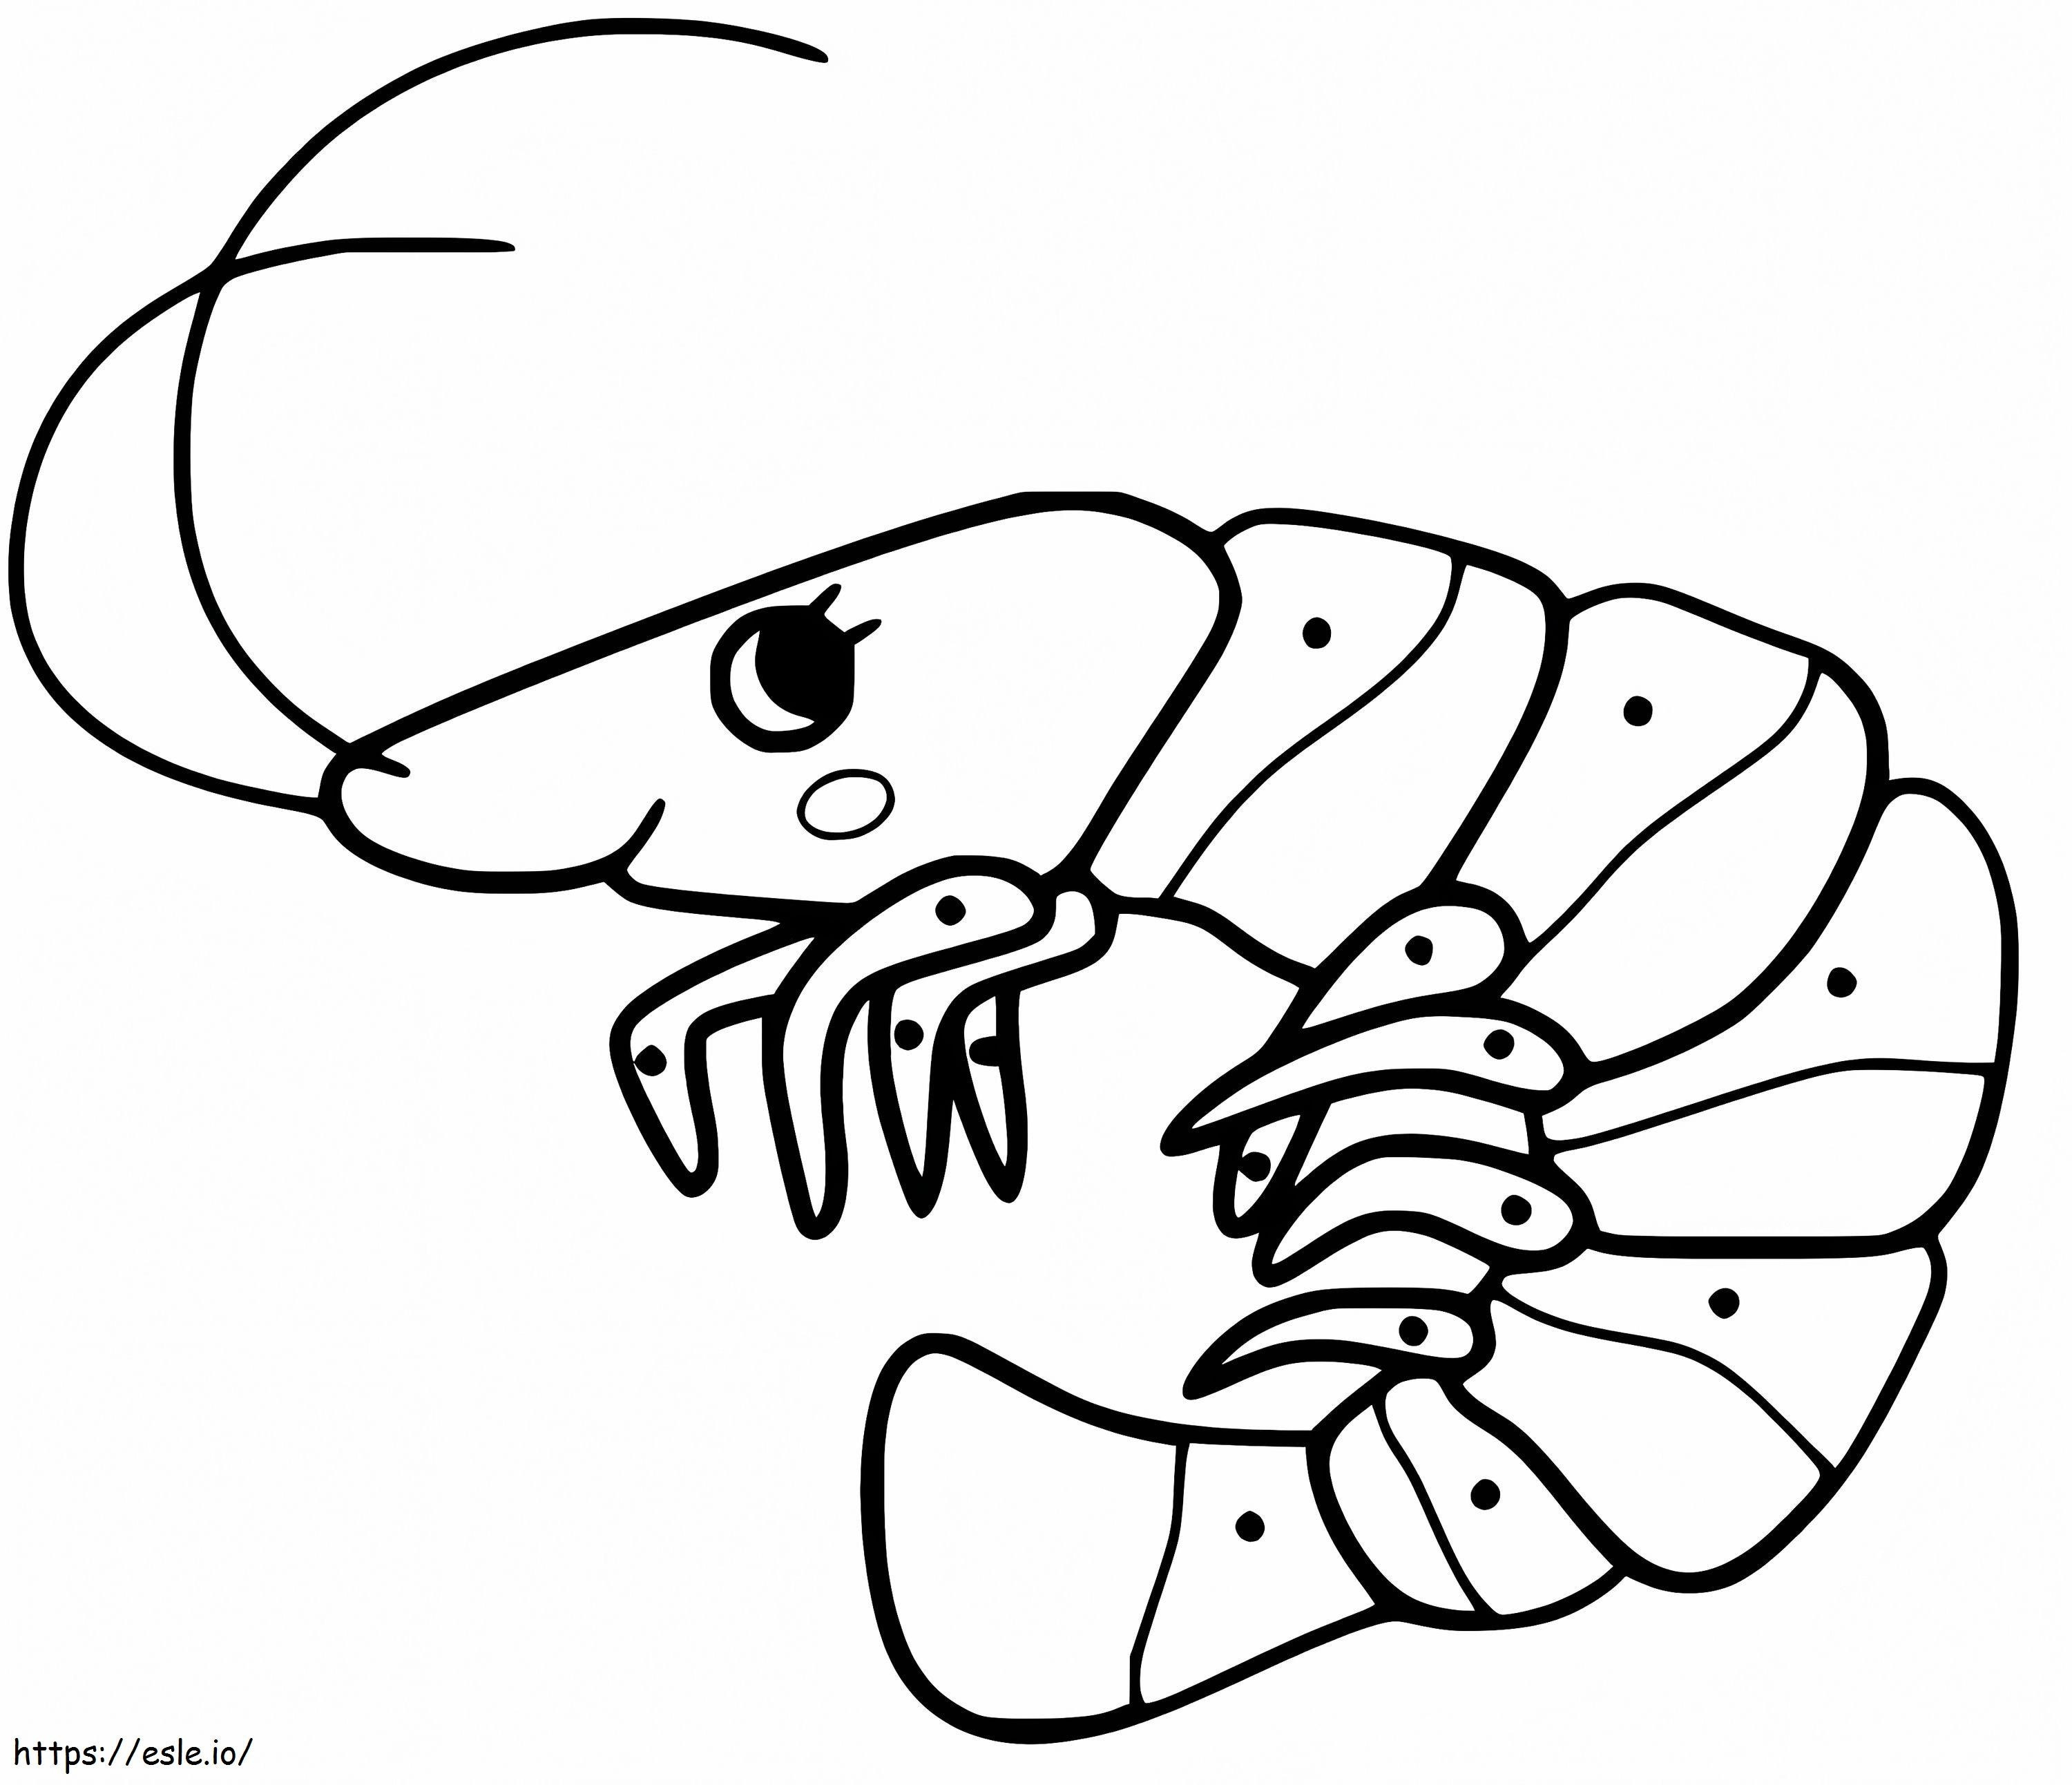 Lovely Shrimp coloring page